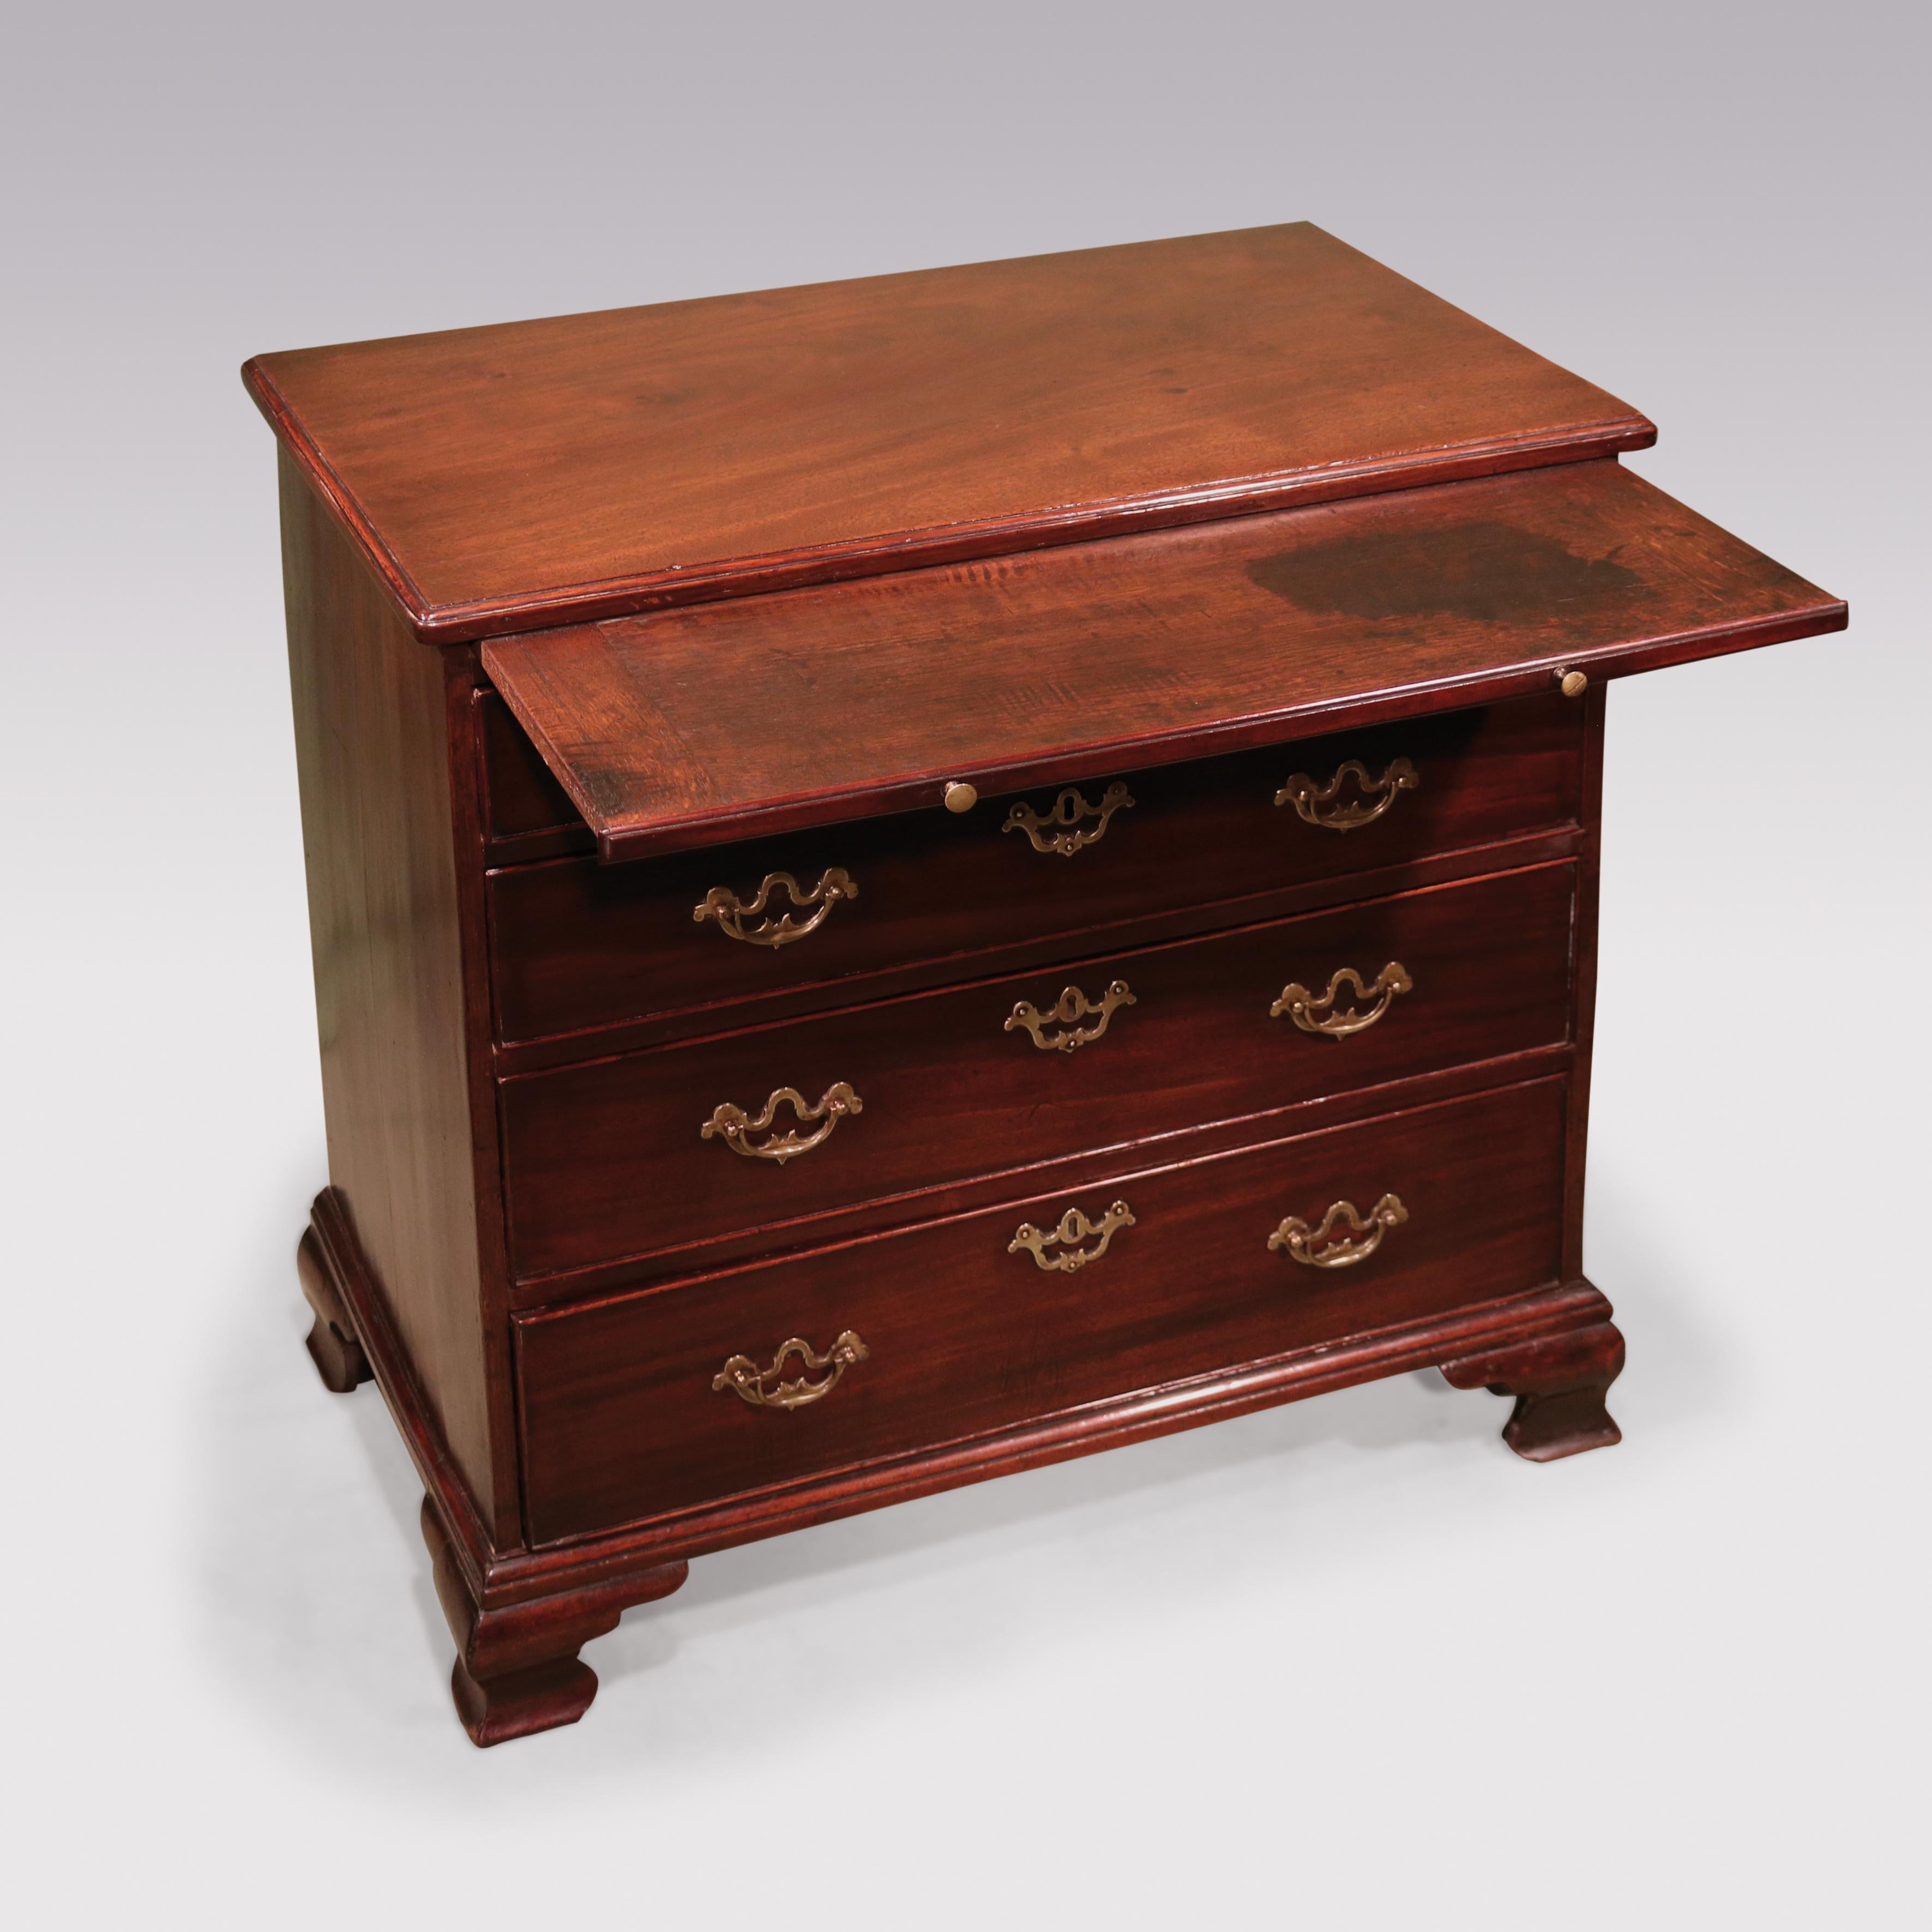 A mid-18th century mahogany chest of drawers of attractive small proportions, having moulded edged top above brushing slide with 4 graduated cockbeaded drawers, retaining original brass handles, supported on ogee bracket feet.
Note: There is a